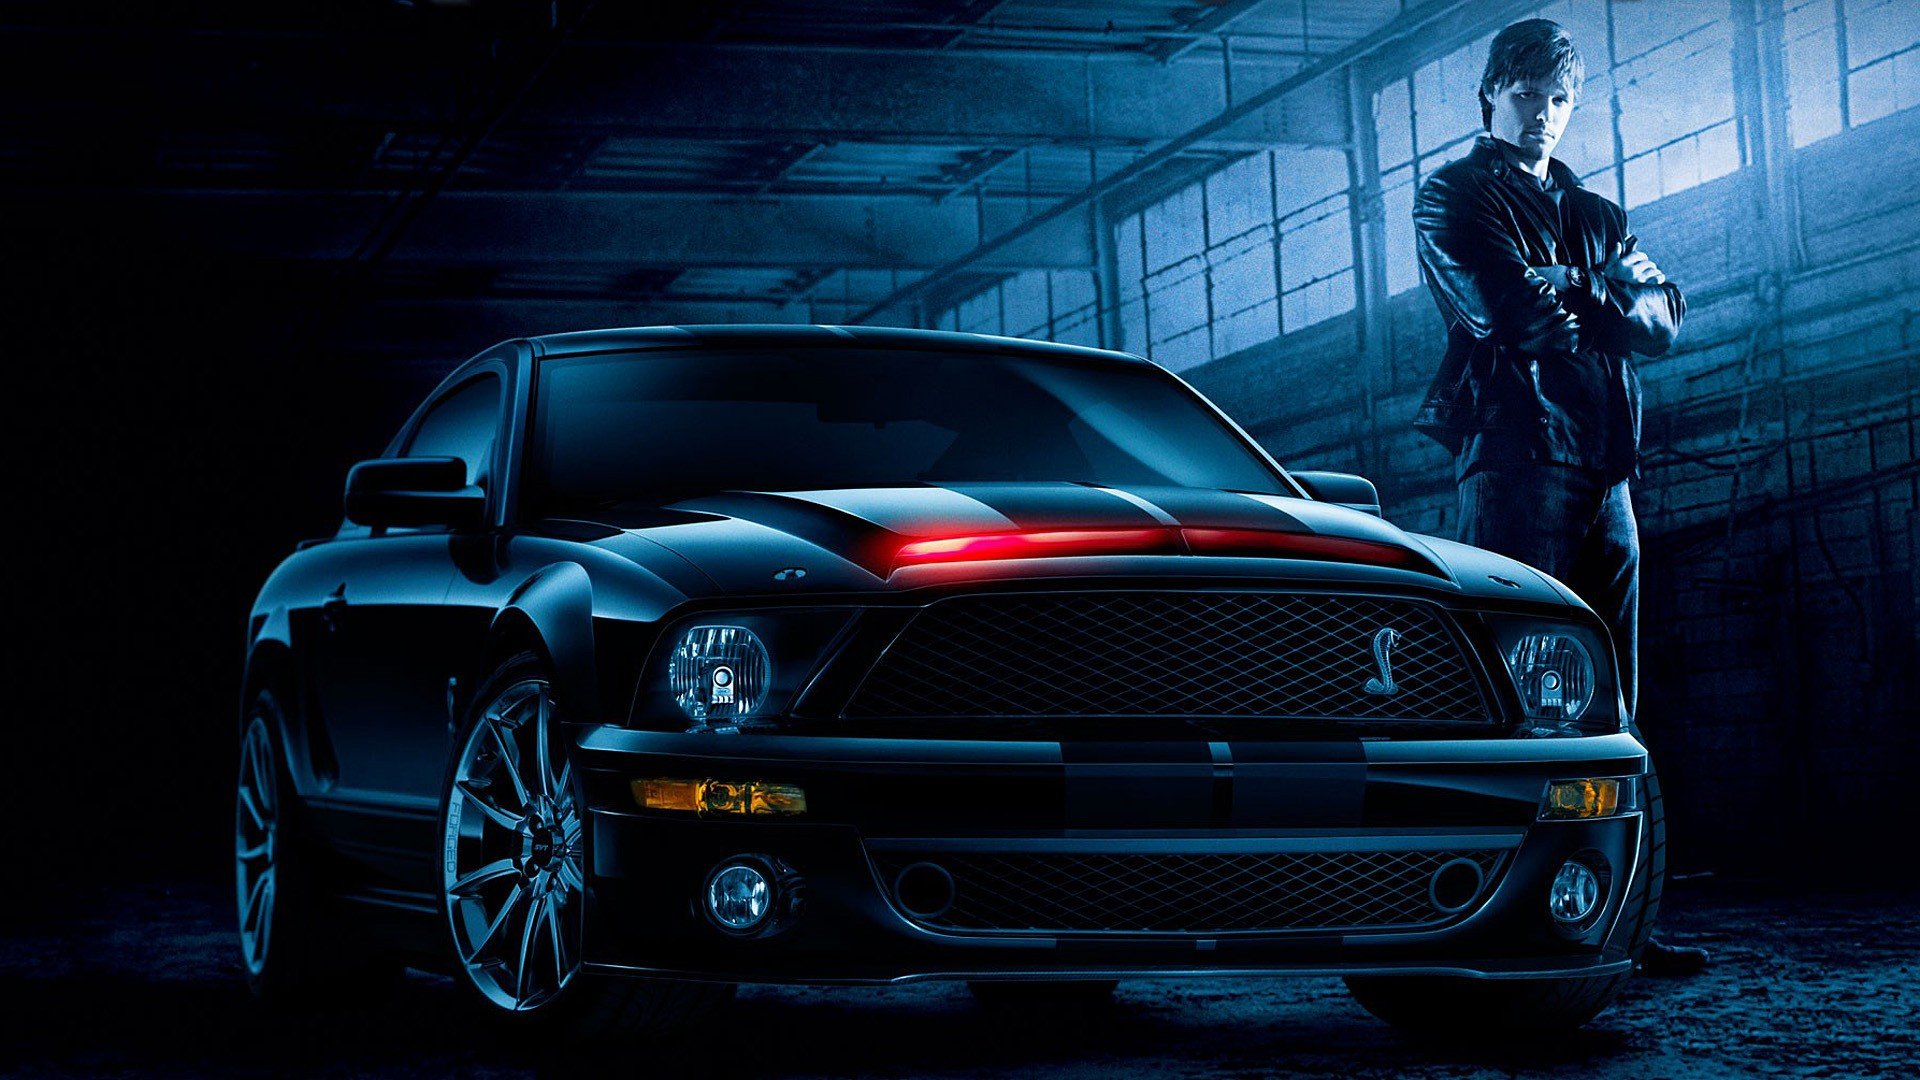 cars, Muscle, Cars, Ford, Mustang, Knight, Rider, Widescreen Wallpaper